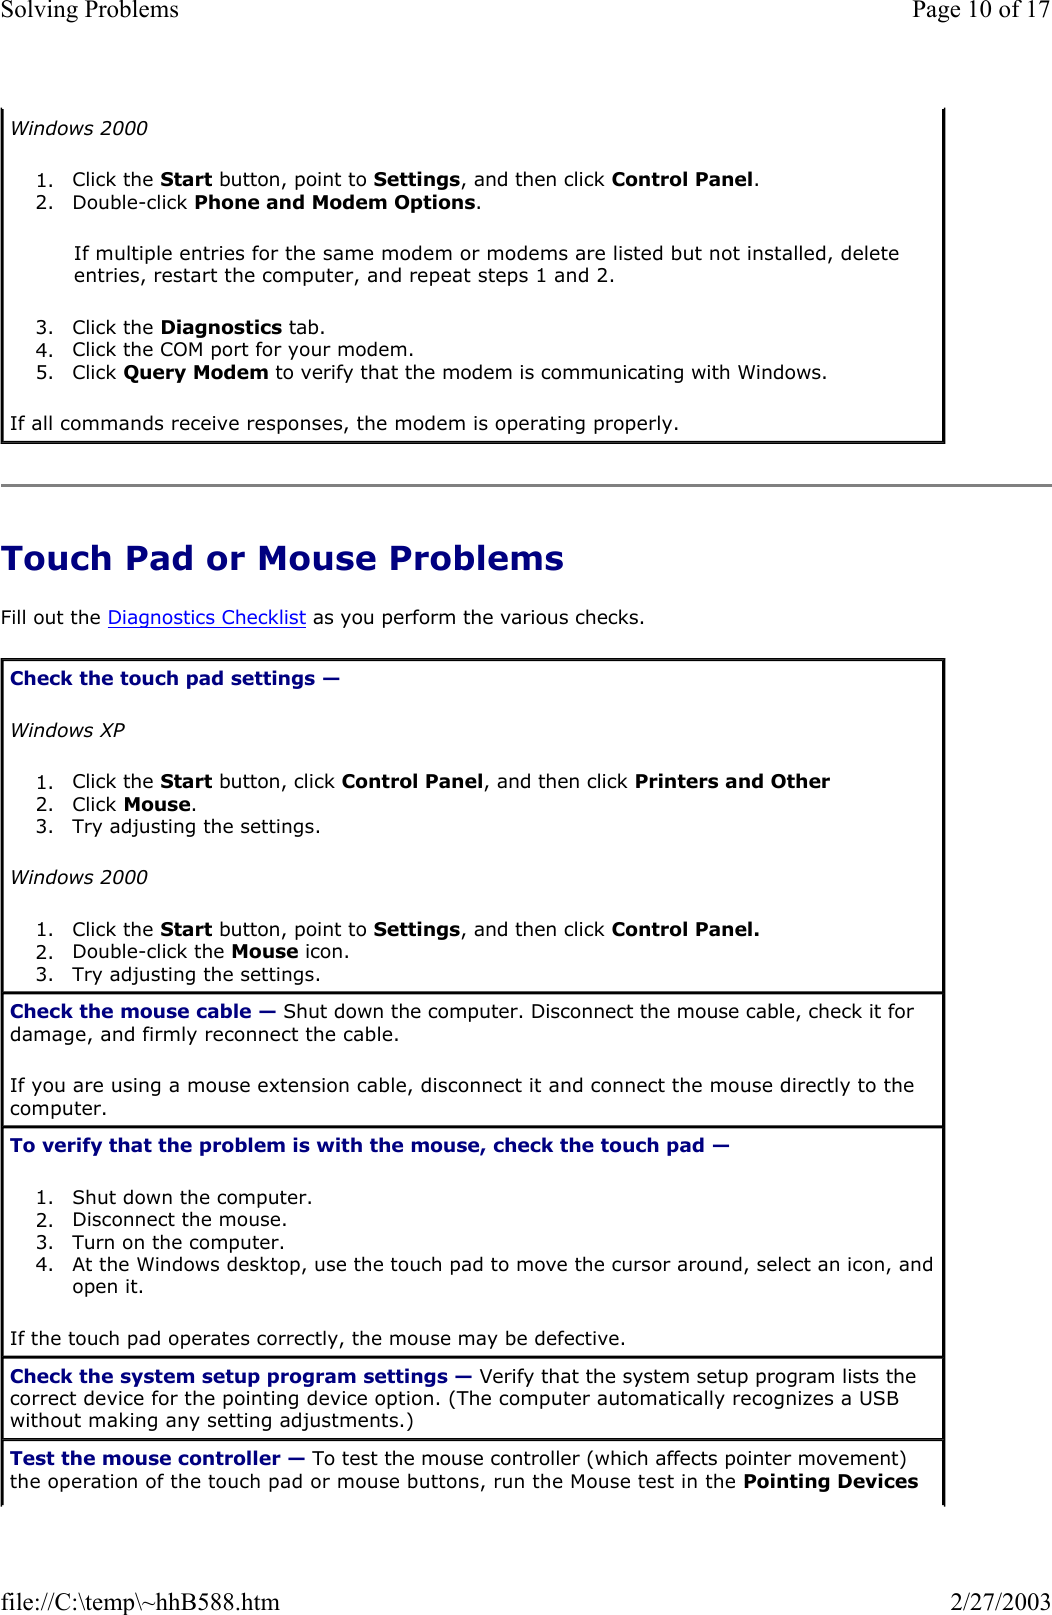 Touch Pad or Mouse Problems Fill out the Diagnostics Checklist as you perform the various checks. Windows 2000 1. Click the Start button, point to Settings, and then click Control Panel.  2. Double-click Phone and Modem Options.  If multiple entries for the same modem or modems are listed but not installed, delete entries, restart the computer, and repeat steps 1 and 2. 3. Click the Diagnostics tab.  4. Click the COM port for your modem.  5. Click Query Modem to verify that the modem is communicating with Windows.  If all commands receive responses, the modem is operating properly. Check the touch pad settings —  Windows XP 1. Click the Start button, click Control Panel, and then click Printers and Other 2. Click Mouse.  3. Try adjusting the settings.  Windows 2000 1. Click the Start button, point to Settings, and then click Control Panel.  2. Double-click the Mouse icon.  3. Try adjusting the settings.  Check the mouse cable — Shut down the computer. Disconnect the mouse cable, check it for damage, and firmly reconnect the cable. If you are using a mouse extension cable, disconnect it and connect the mouse directly to the computer. To verify that the problem is with the mouse, check the touch pad —  1. Shut down the computer.  2. Disconnect the mouse.  3. Turn on the computer.  4. At the Windows desktop, use the touch pad to move the cursor around, select an icon, and open it.  If the touch pad operates correctly, the mouse may be defective. Check the system setup program settings — Verify that the system setup program lists the correct device for the pointing device option. (The computer automatically recognizes a USB without making any setting adjustments.) Test the mouse controller — To test the mouse controller (which affects pointer movement) the operation of the touch pad or mouse buttons, run the Mouse test in the Pointing Devices Page 10 of 17Solving Problems2/27/2003file://C:\temp\~hhB588.htm